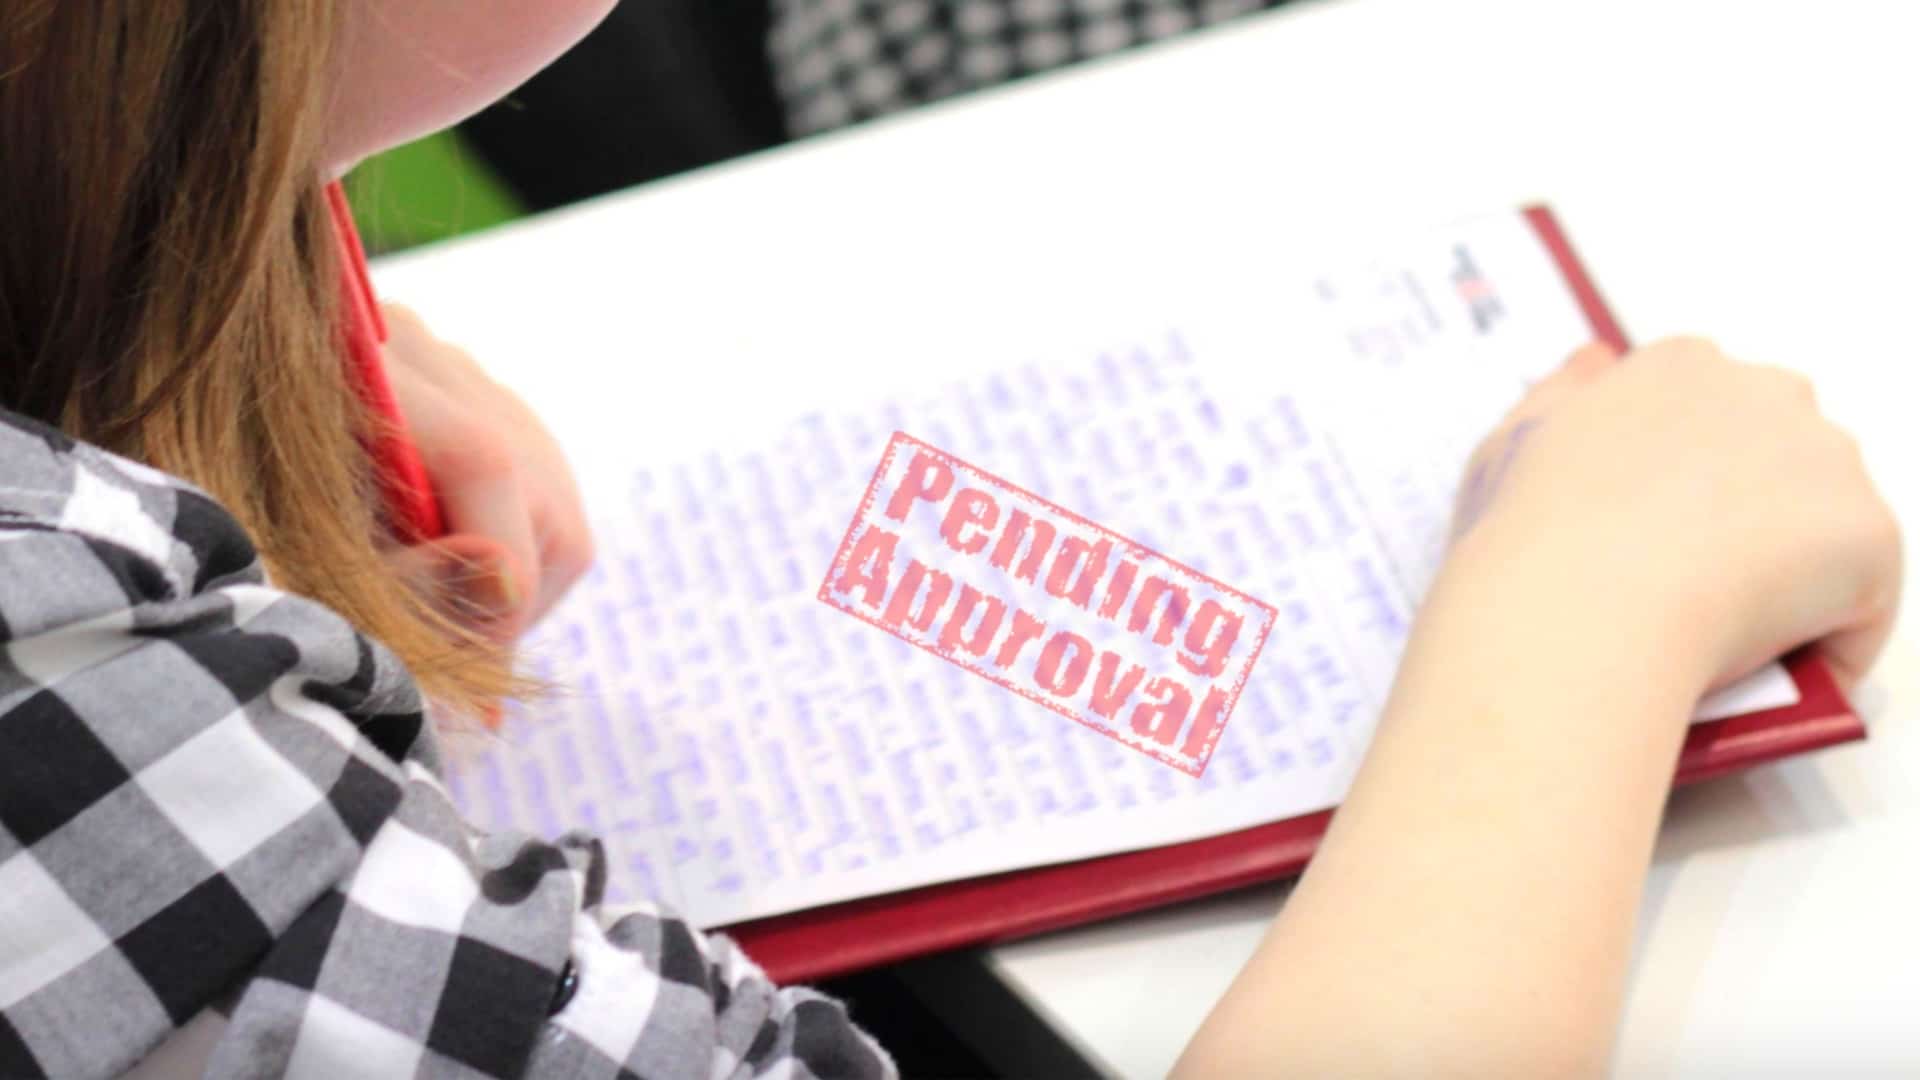 A student gets back an essay stamped "Pending Approval."